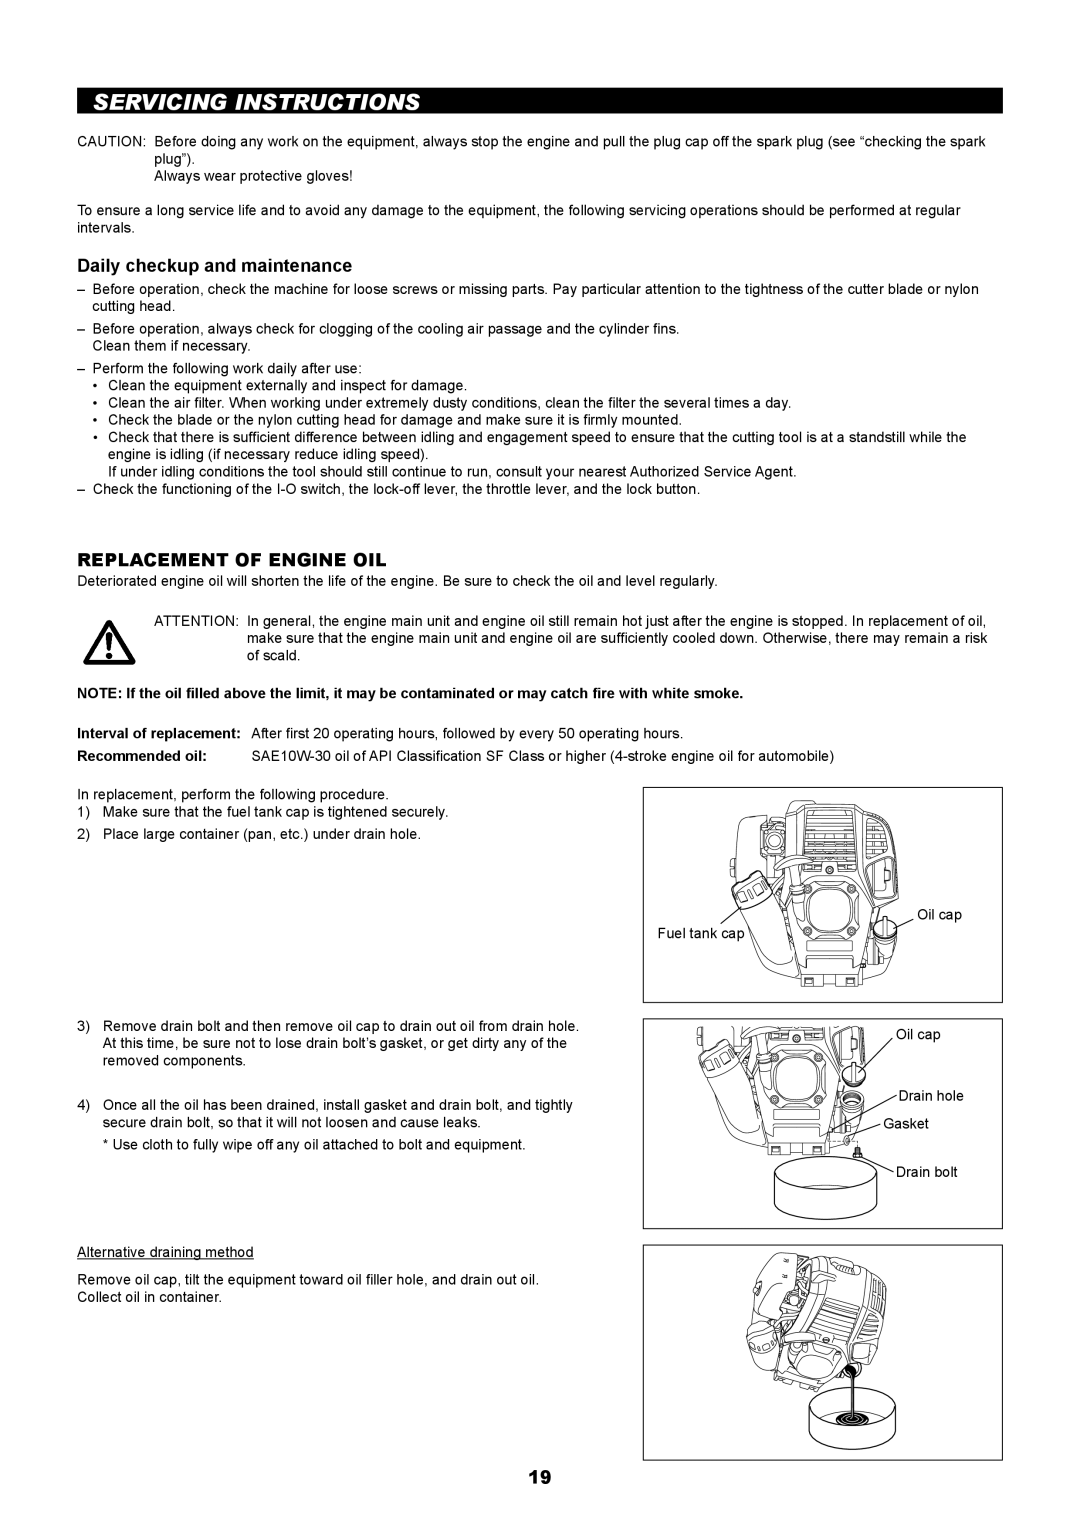 Makita EM2650UH, EM2650LH manual Servicing Instructions, Daily checkup and maintenance, Replacement Of Engine Oil 